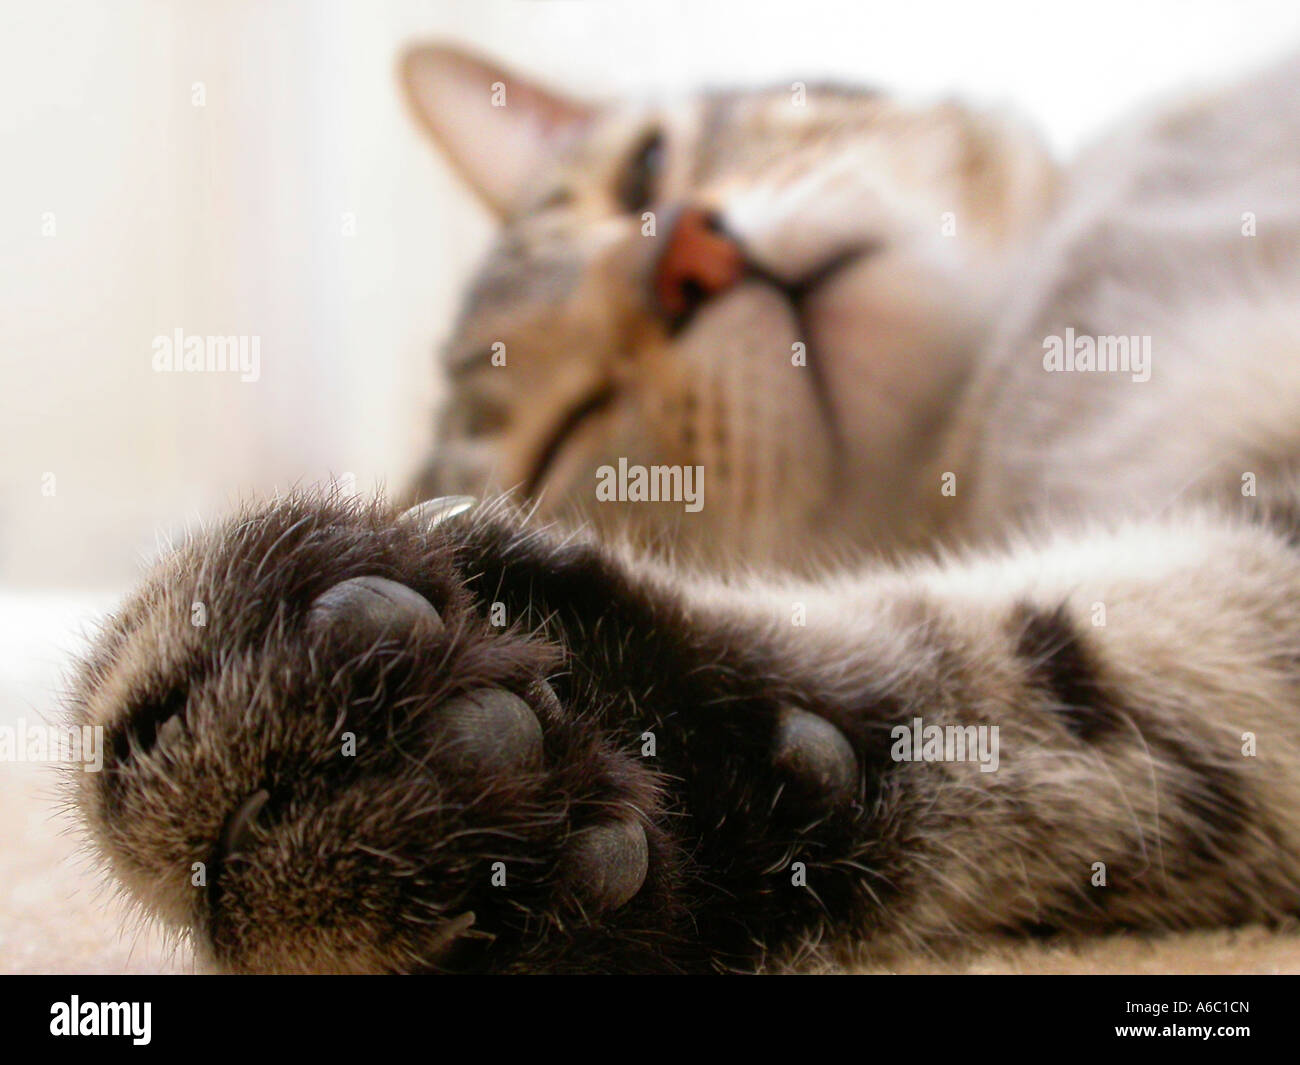 An amusing image of a cat asleep on its back with one large paw seen in sharp focus in the foreground. Stock Photo